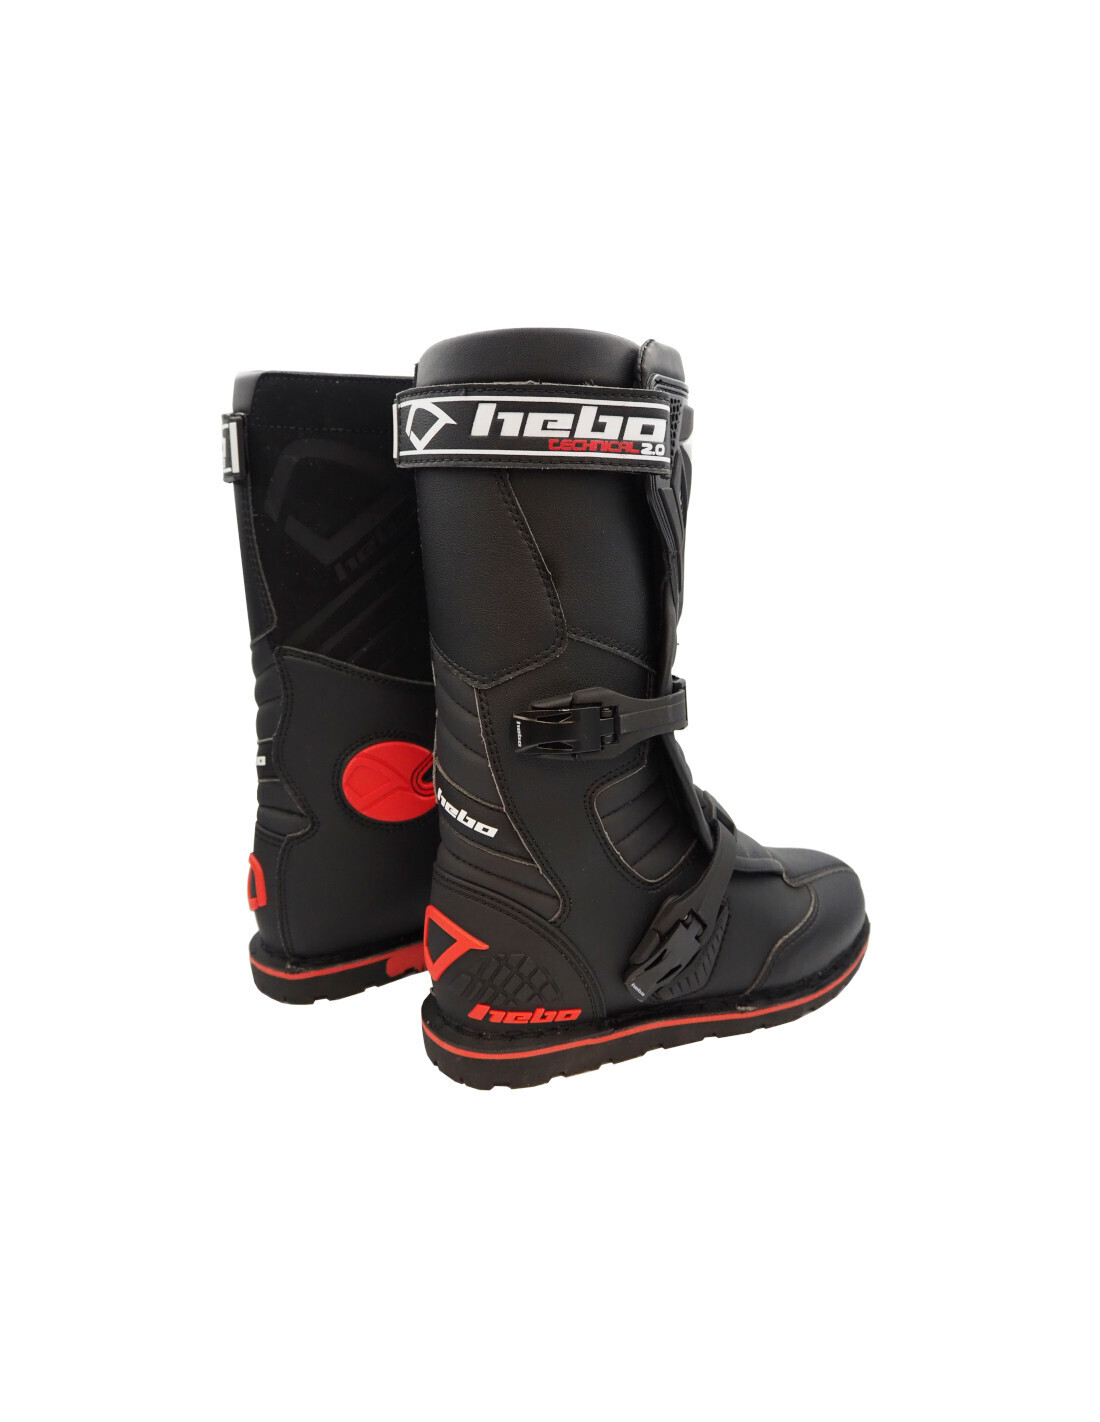 Hebo TECHNICAL 2.0 Trial Boots BLACK